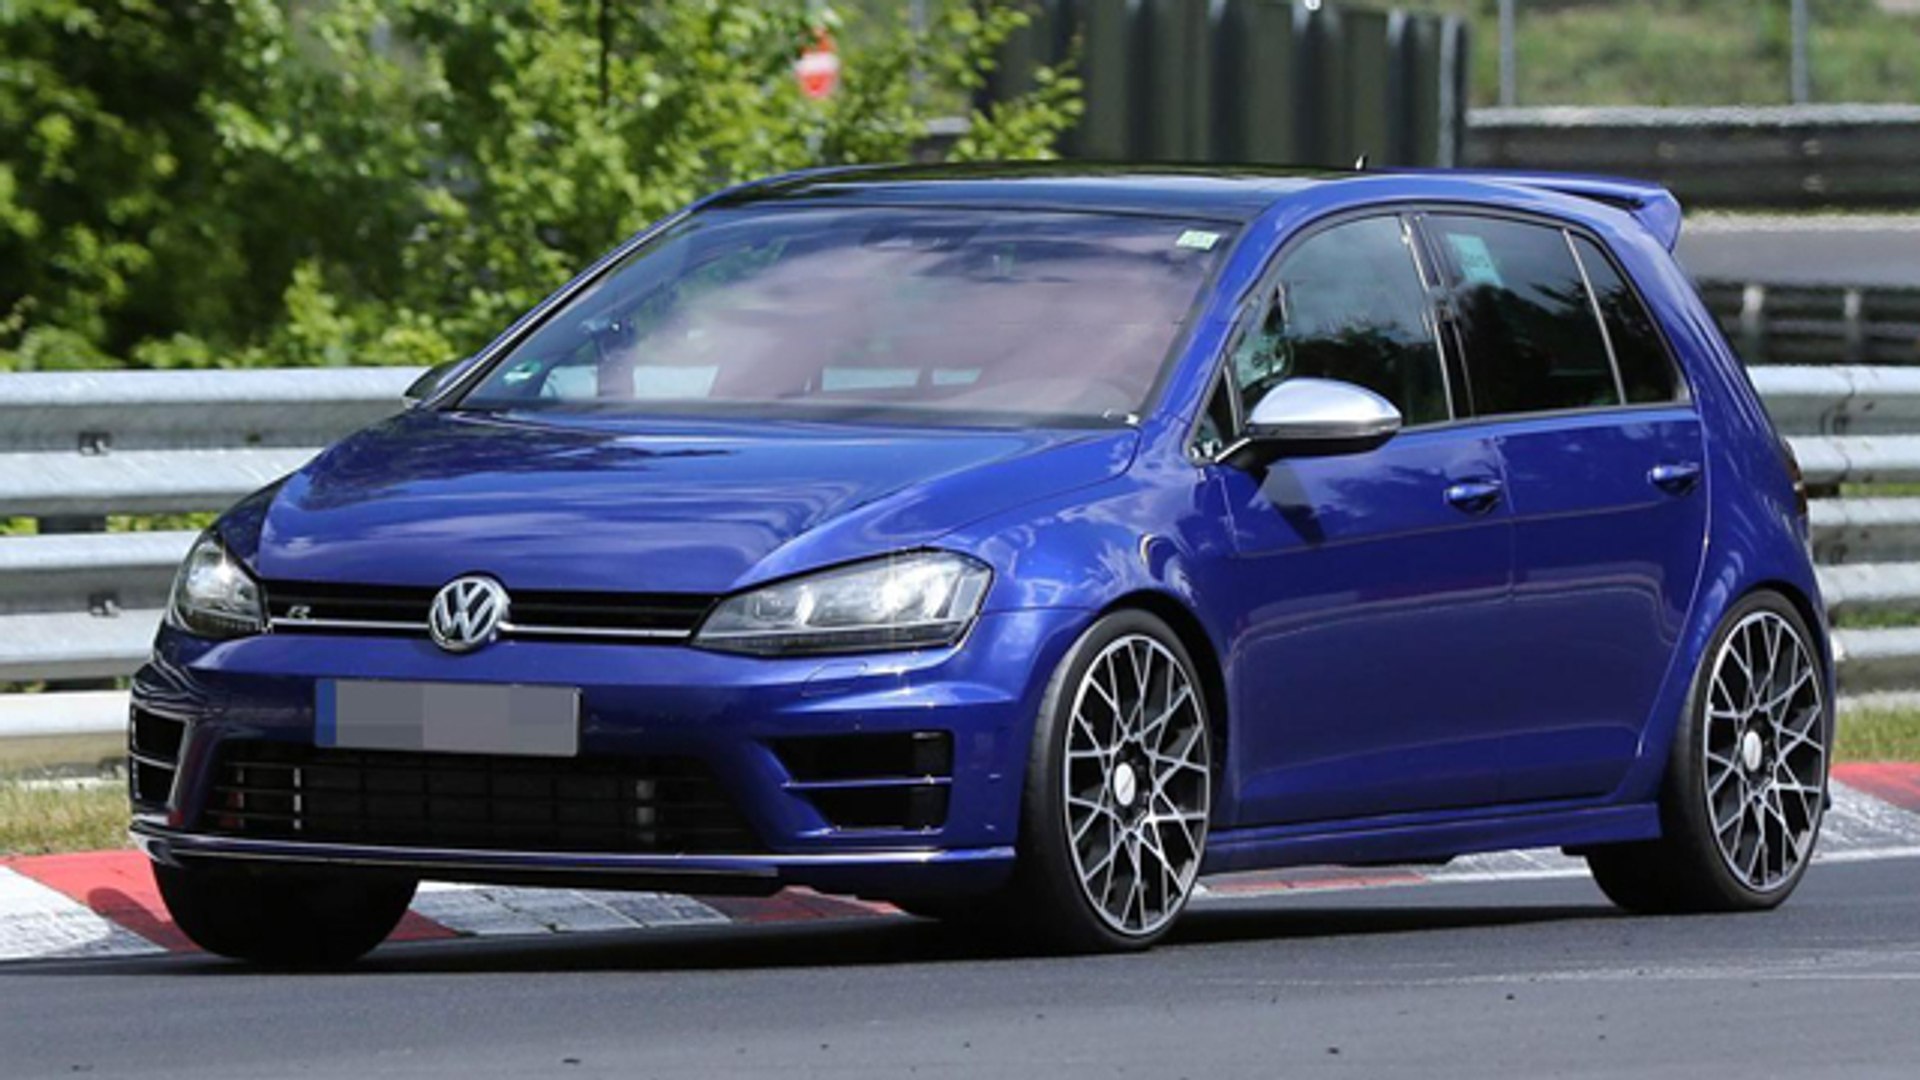 Volkswagen Golf R420 Spotted For The First Time - video Dailymotion